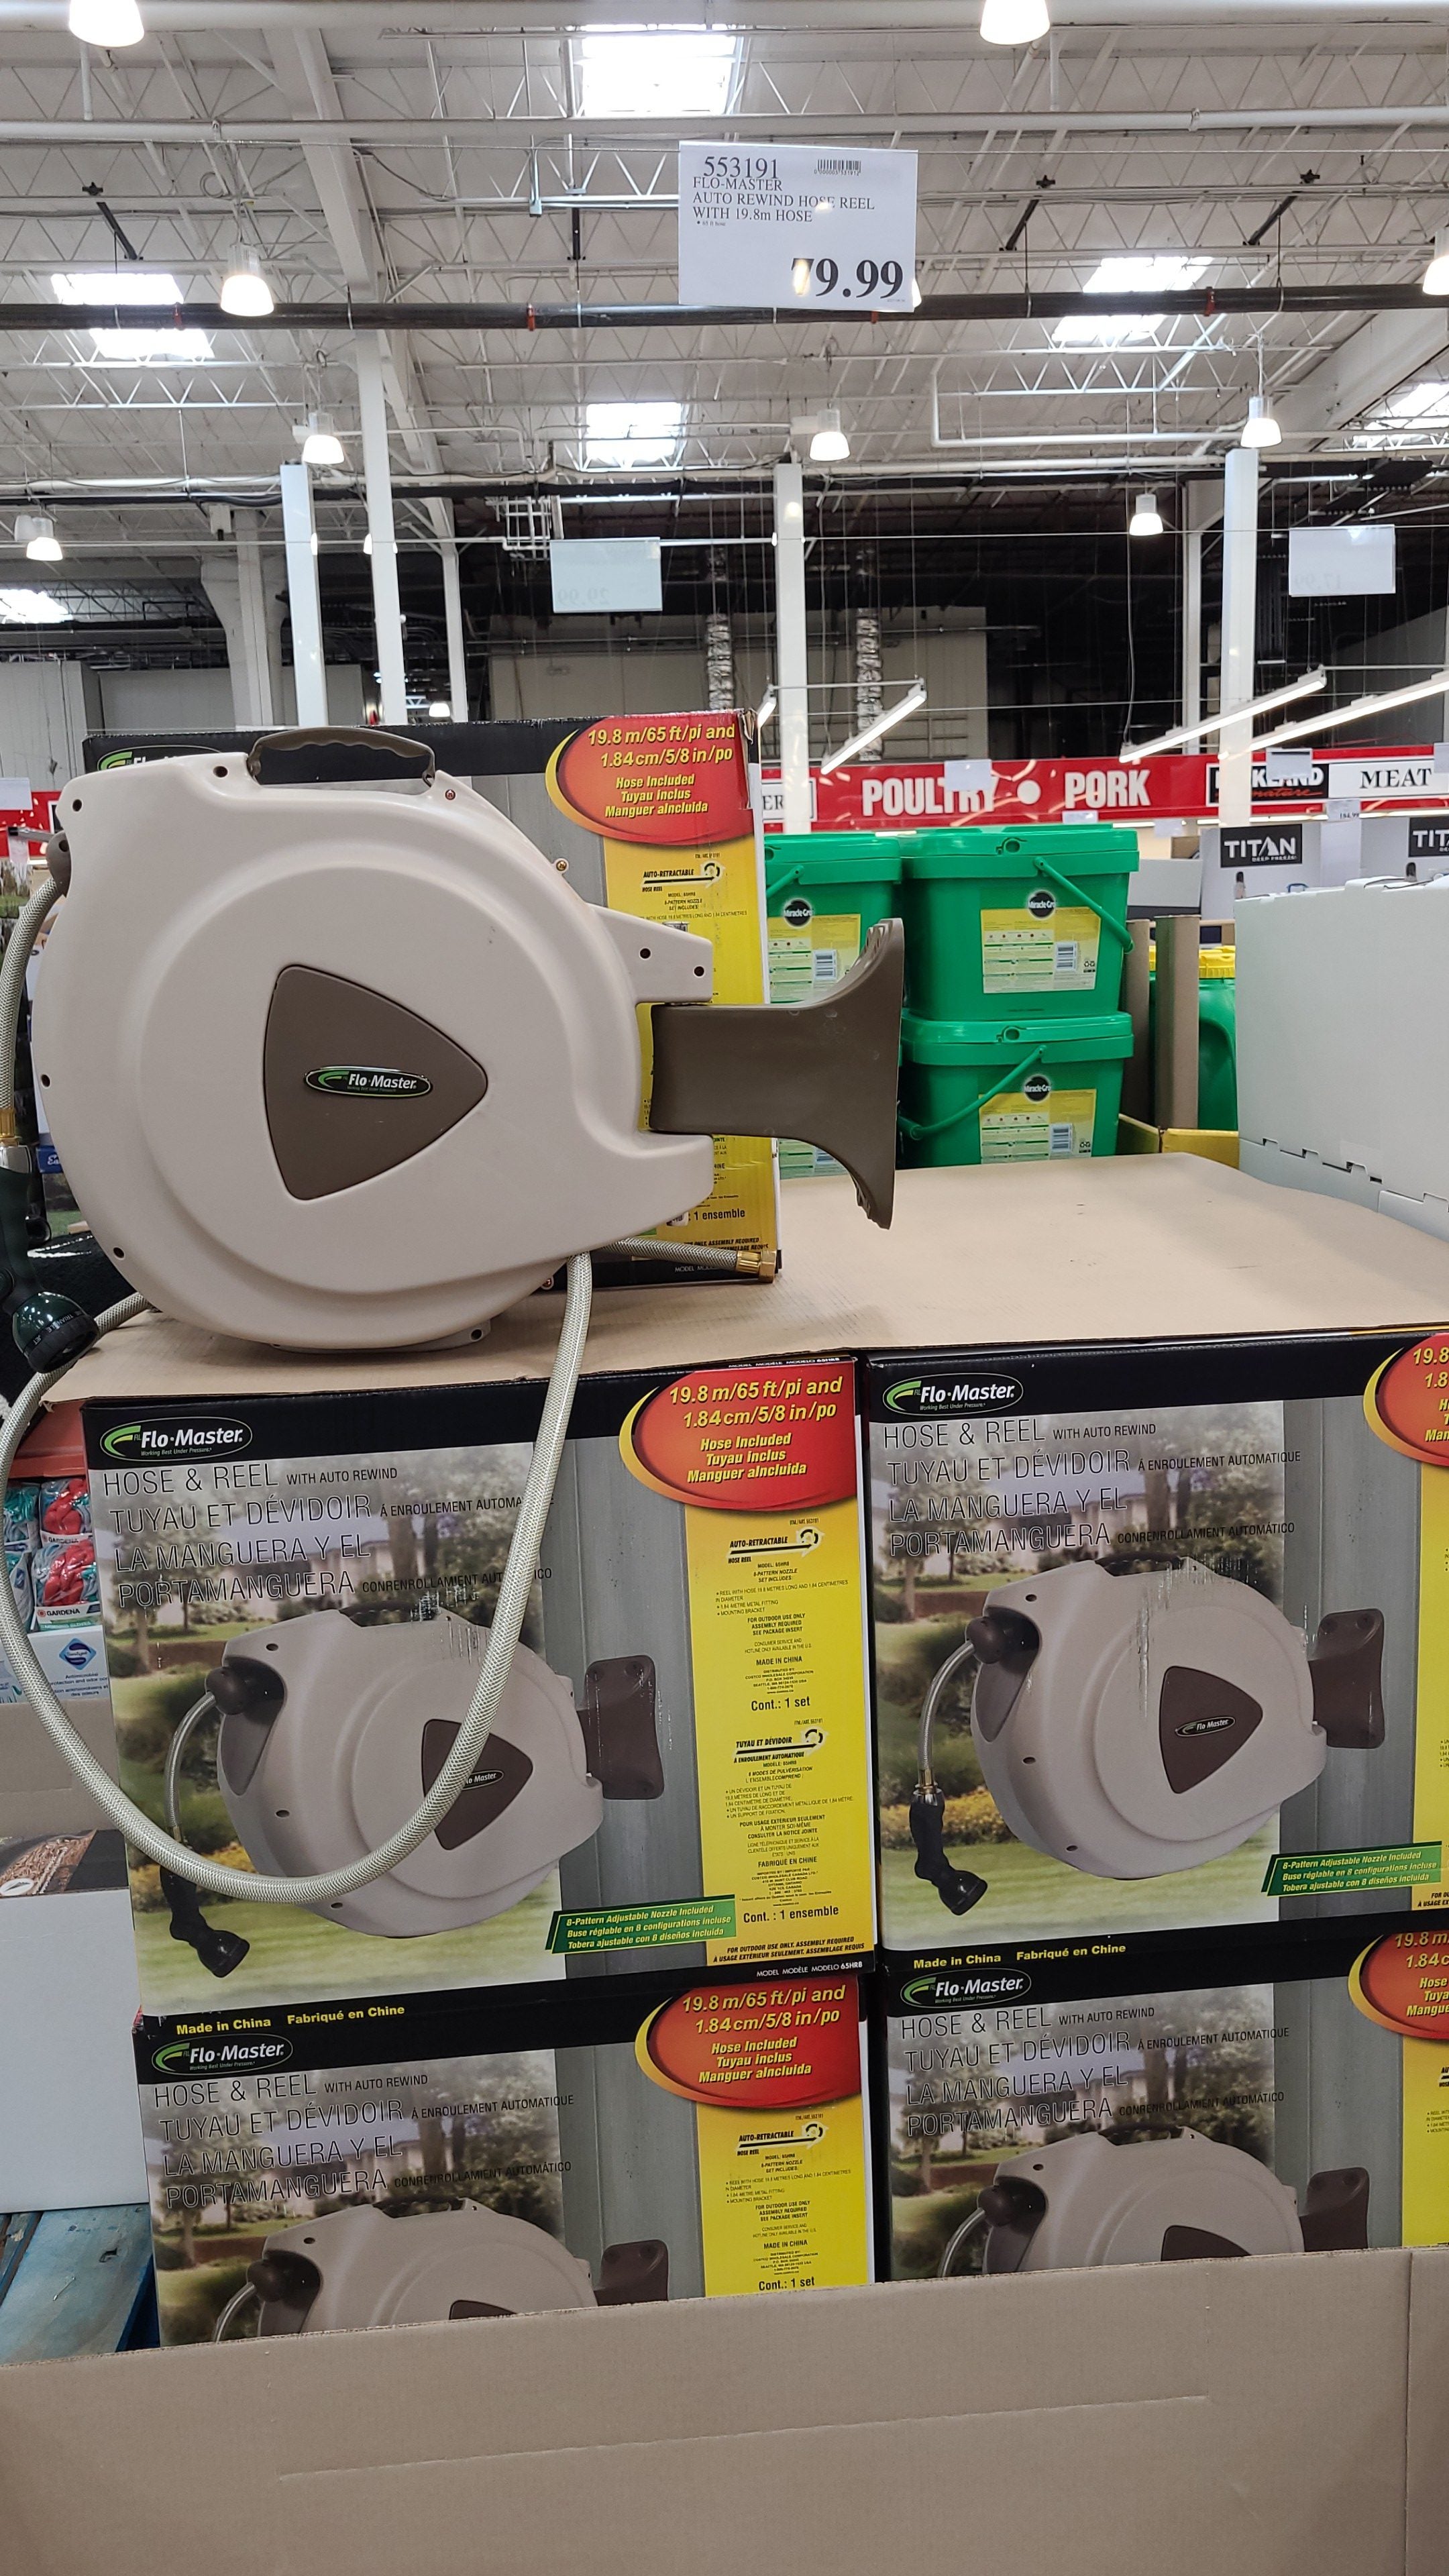 Costco sells this 100' Retractable Hose Reel for $149.99. This is the first  time I have seen an item li…